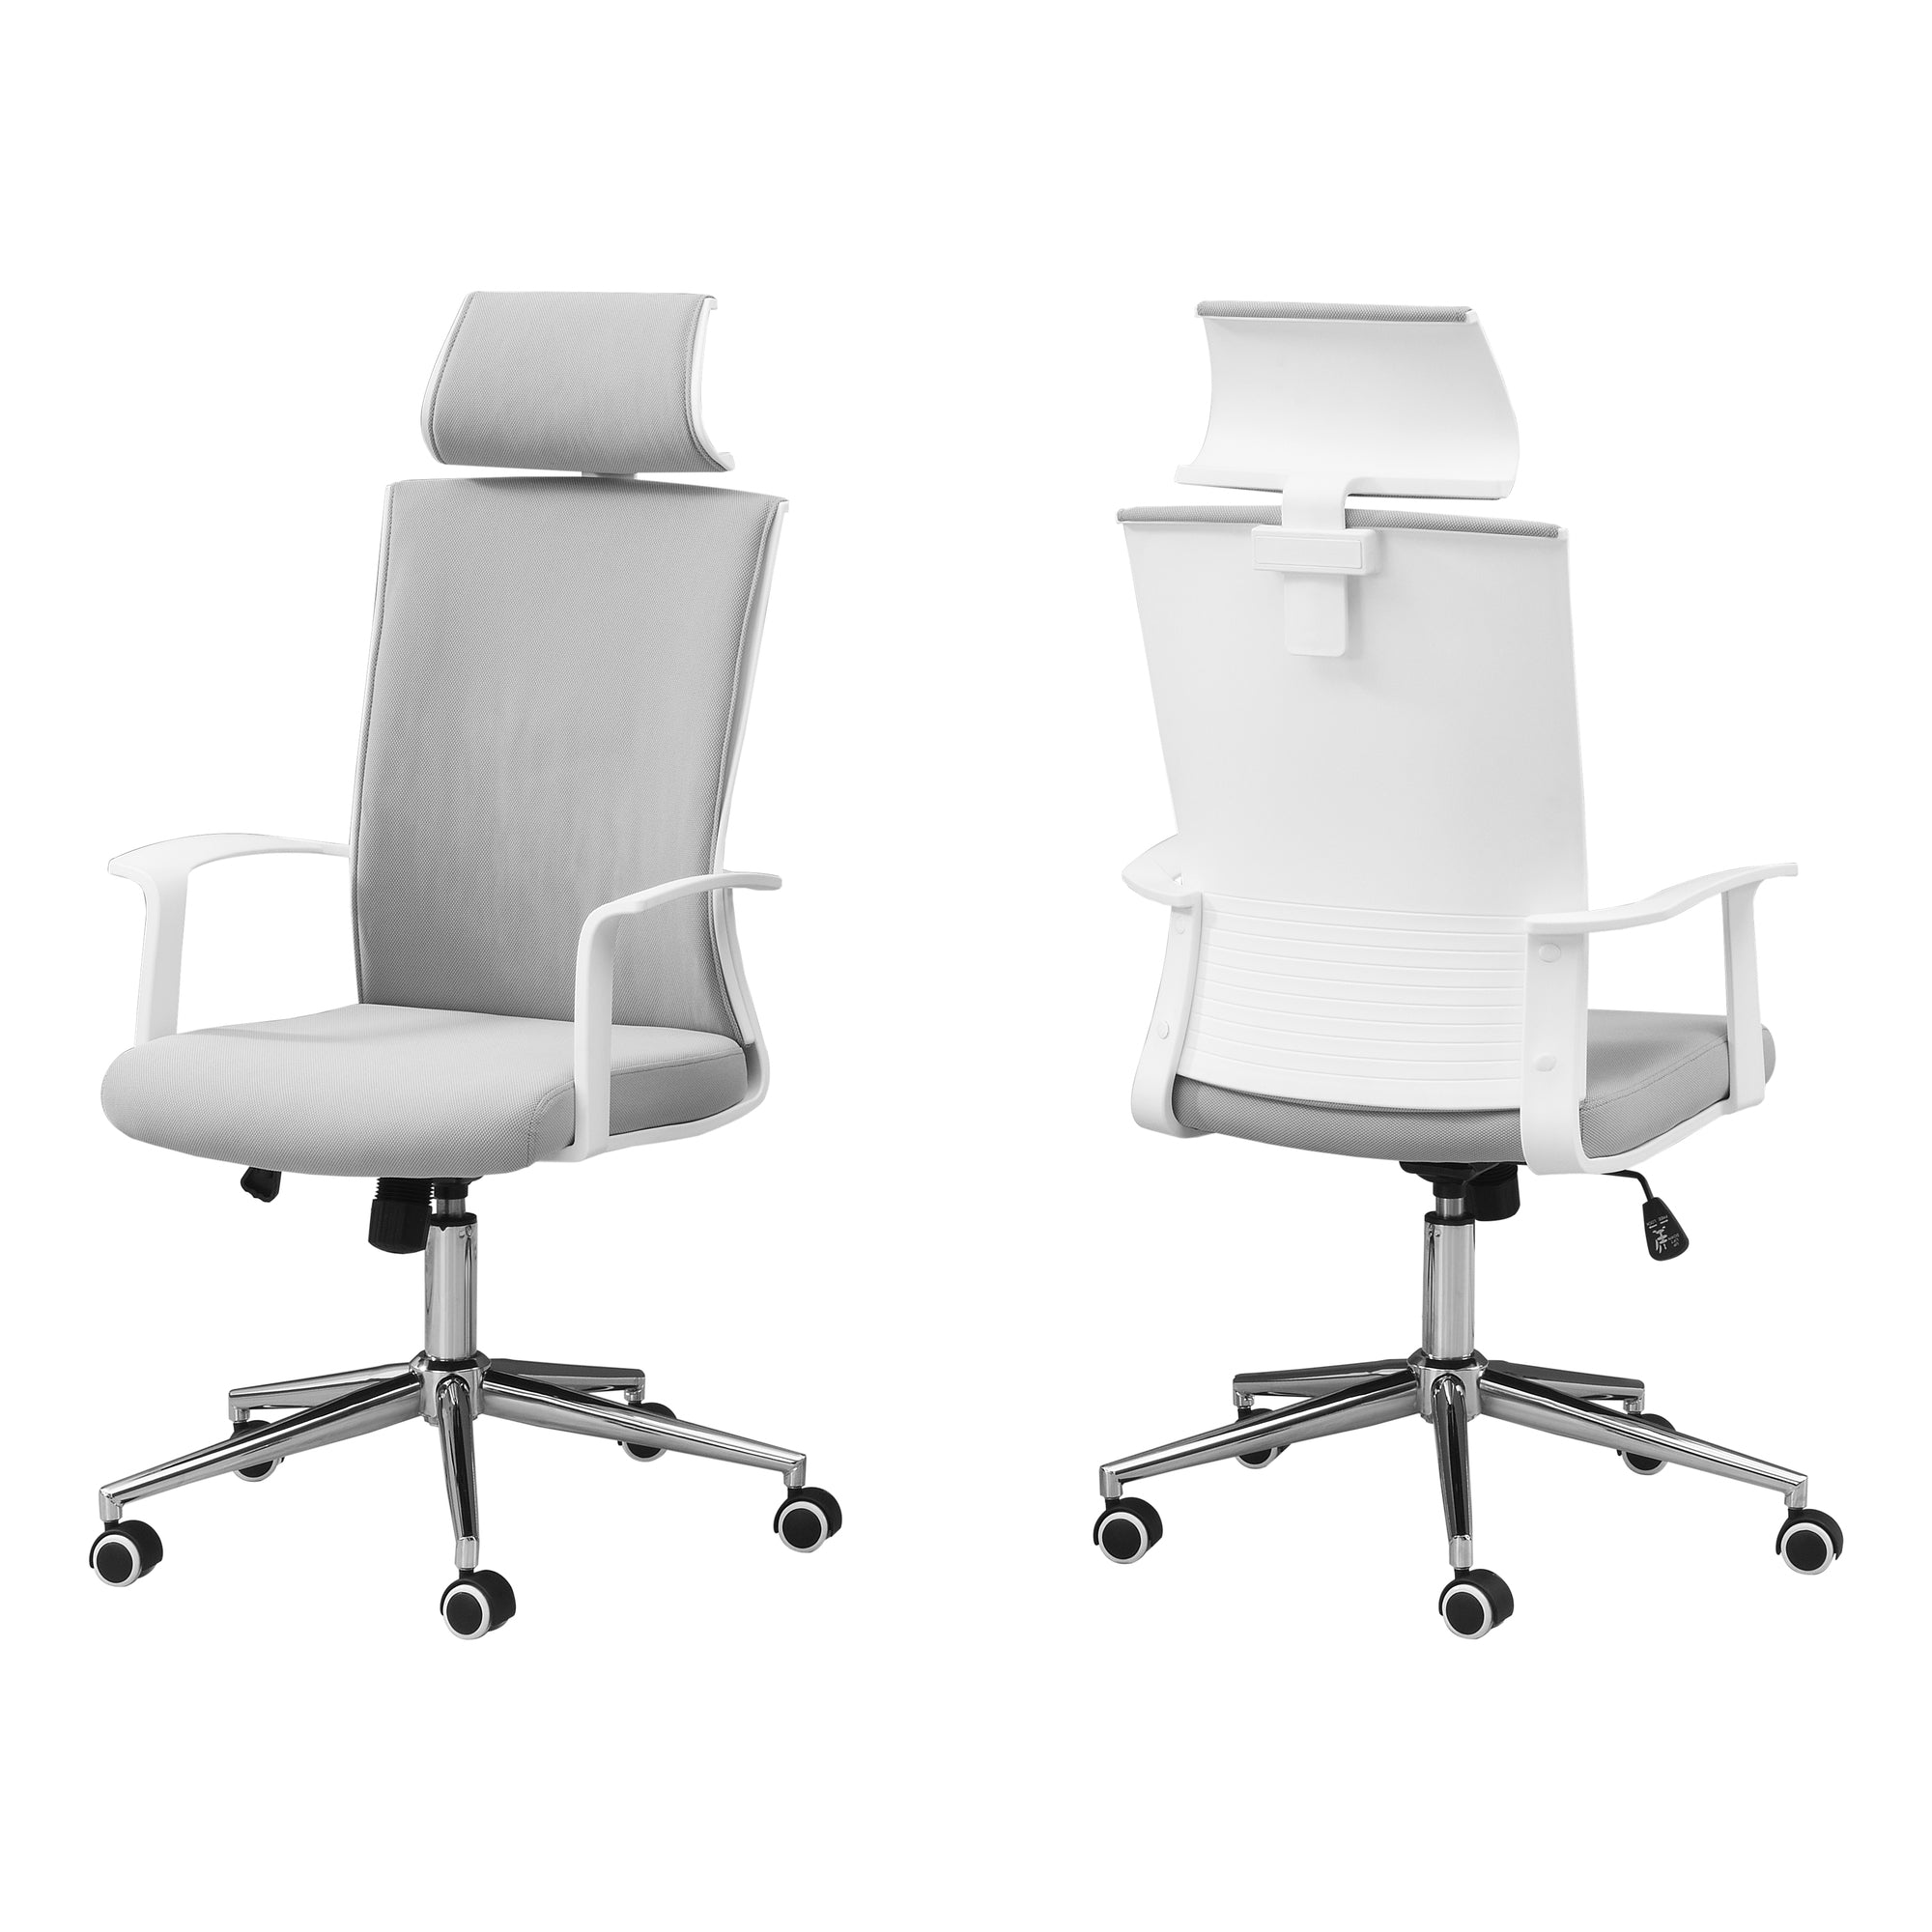 Gray-Fabric-Seat-Swivel-Adjustable-Executive-Chair-Fabric-Back-Plastic-Frame-Office-Chairs